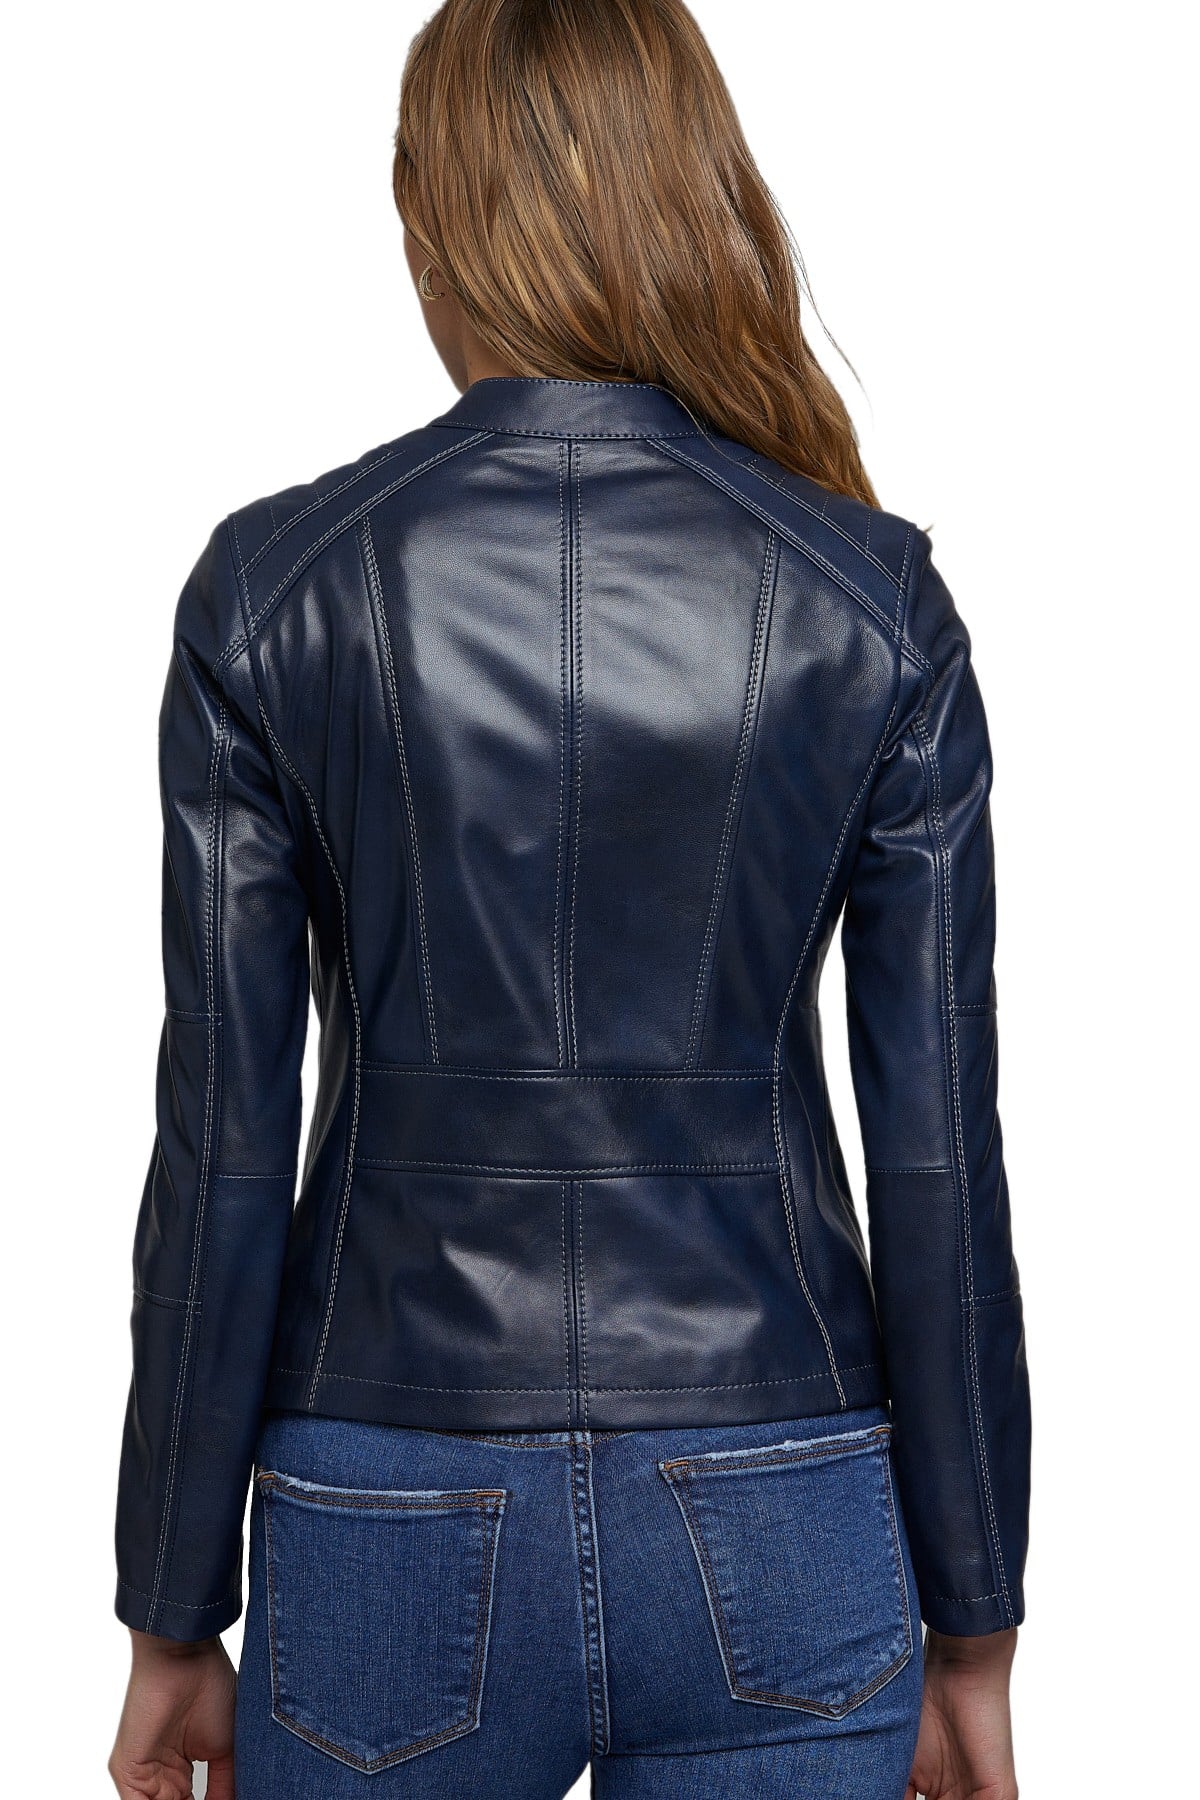 Navy Blue Leather Jacket for Womens Stylish Motorcycle BIKER 